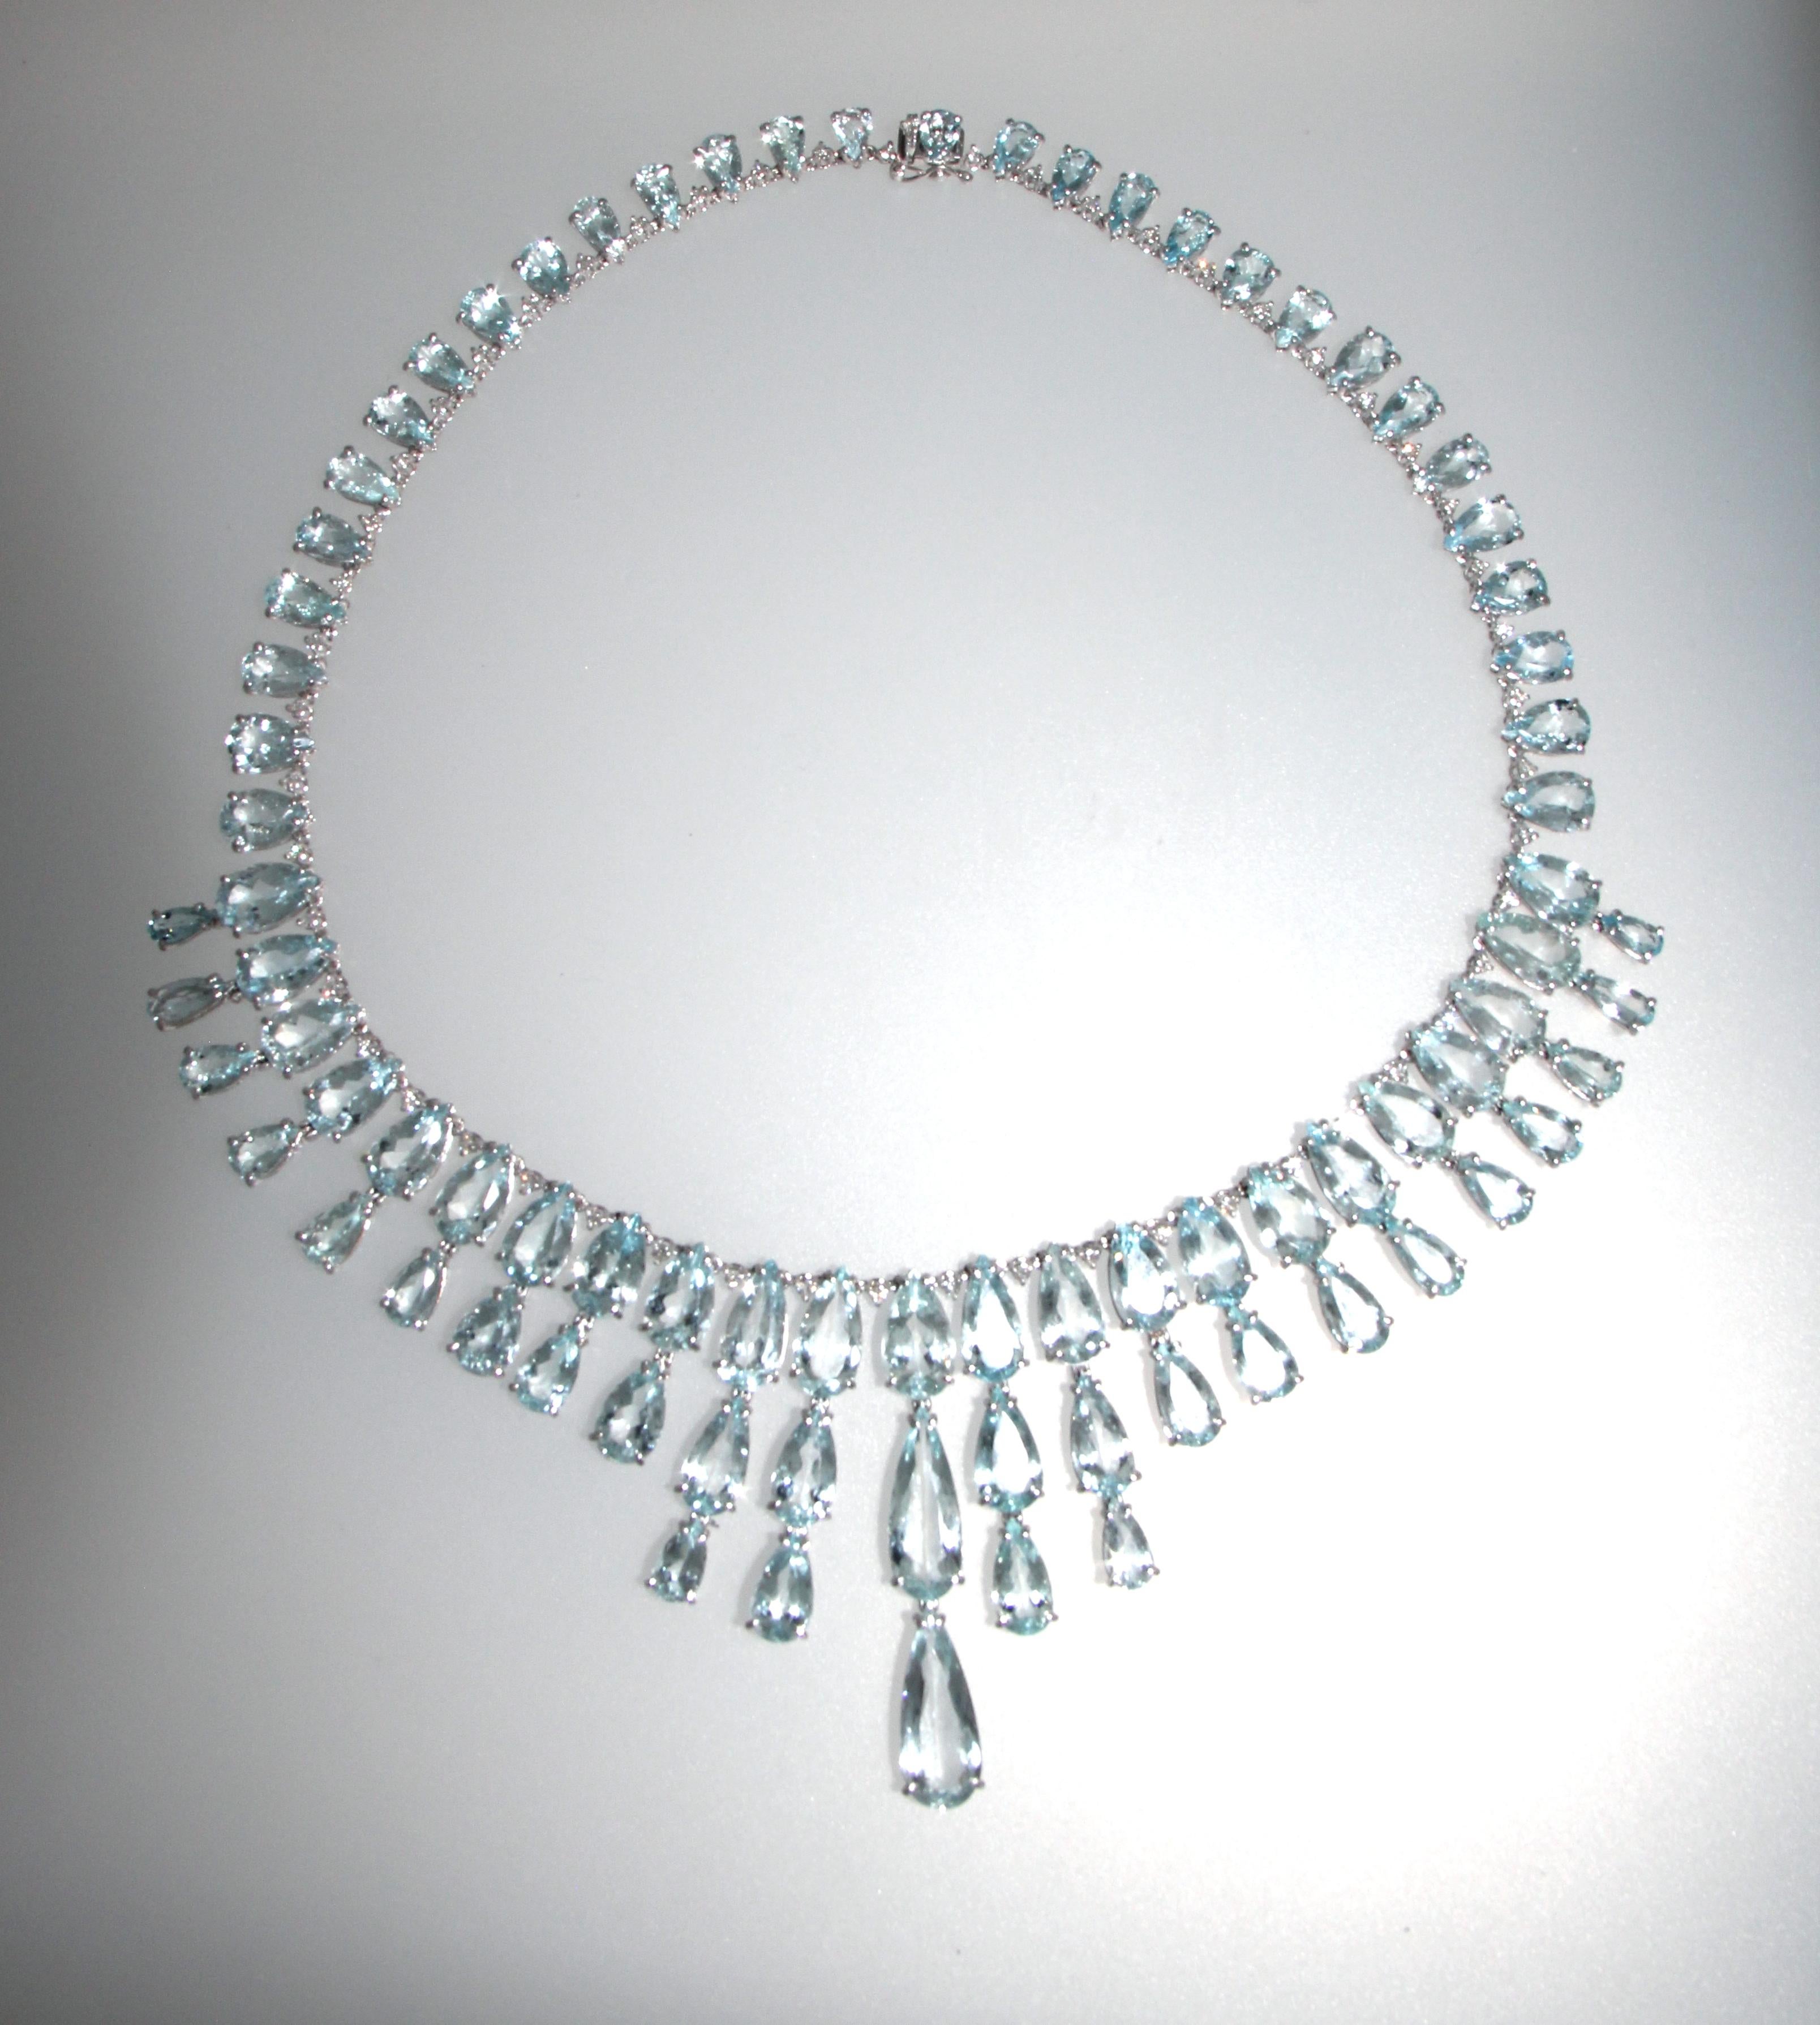 Spectacular 18-karat white gold necklace made entirely by hand by our artisans and composed of 82 pear cut Brazilian aquamarines, all mobile pendants separated from each other by diamonds.

The total weight of the necklace is 65.70 grams

The weight